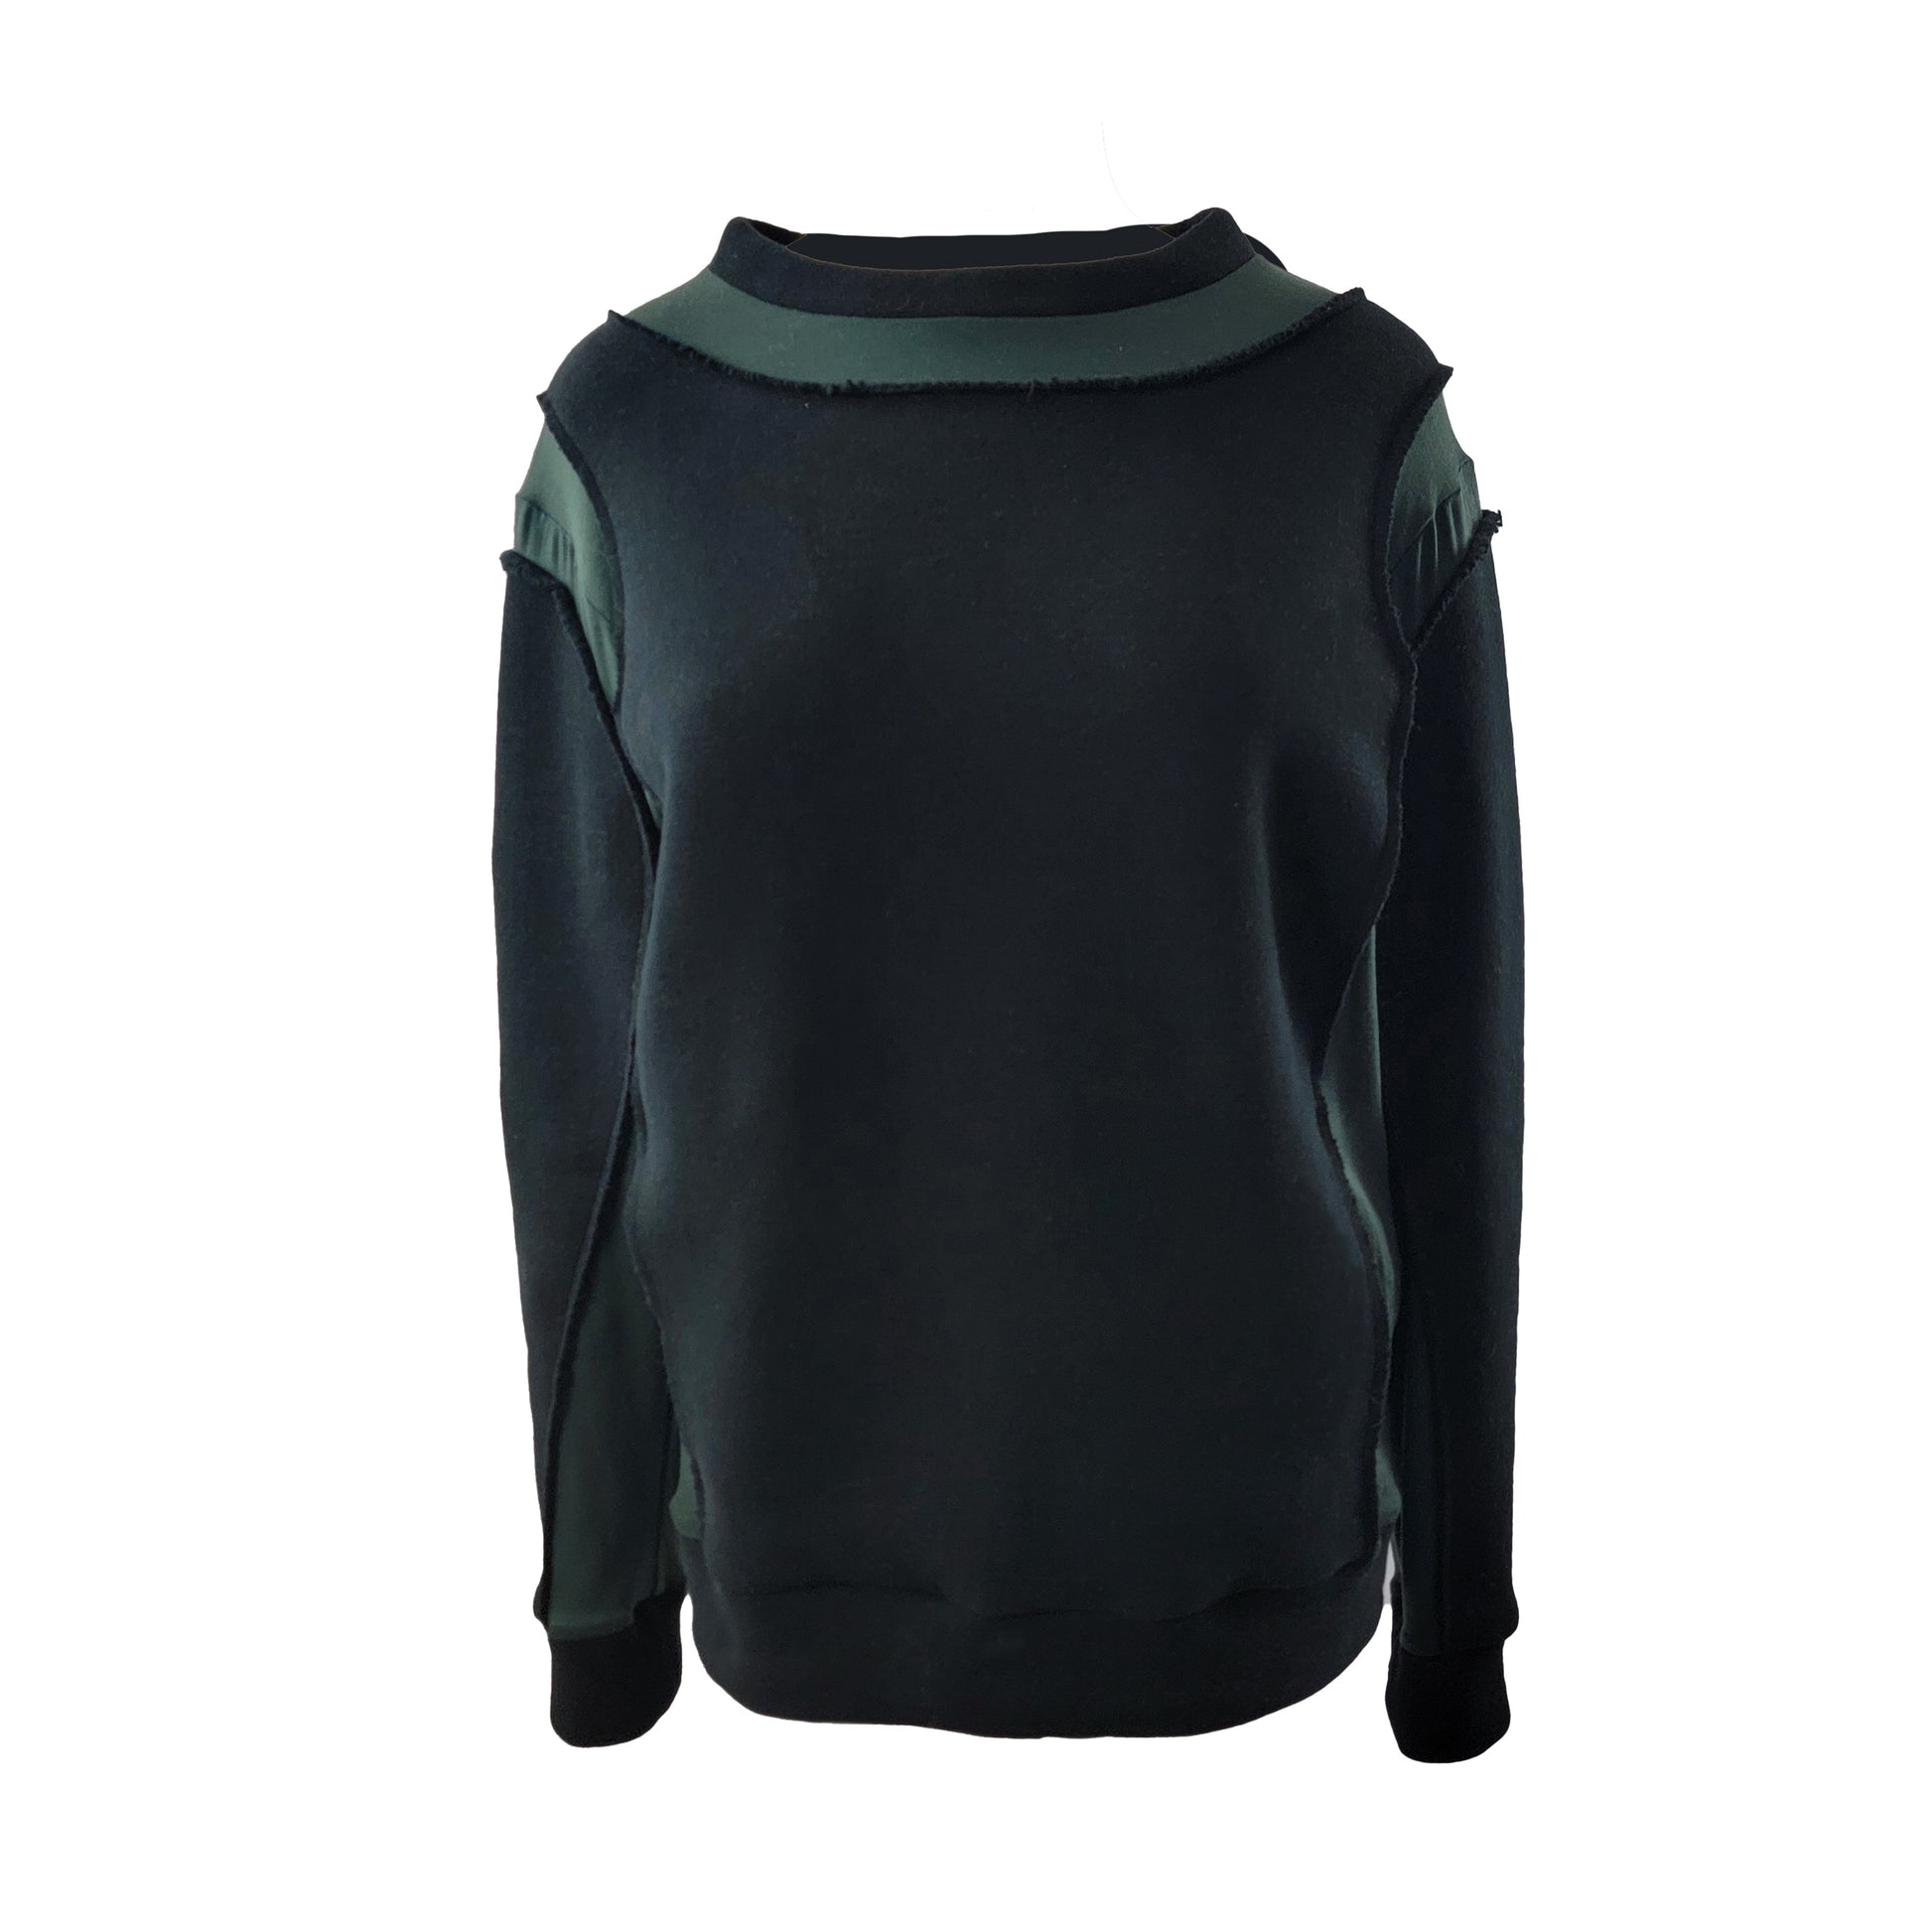 Jersey and Lyocell / cotton sweat shirt with incorporated front seam inset pocket in Black and Bottle Green